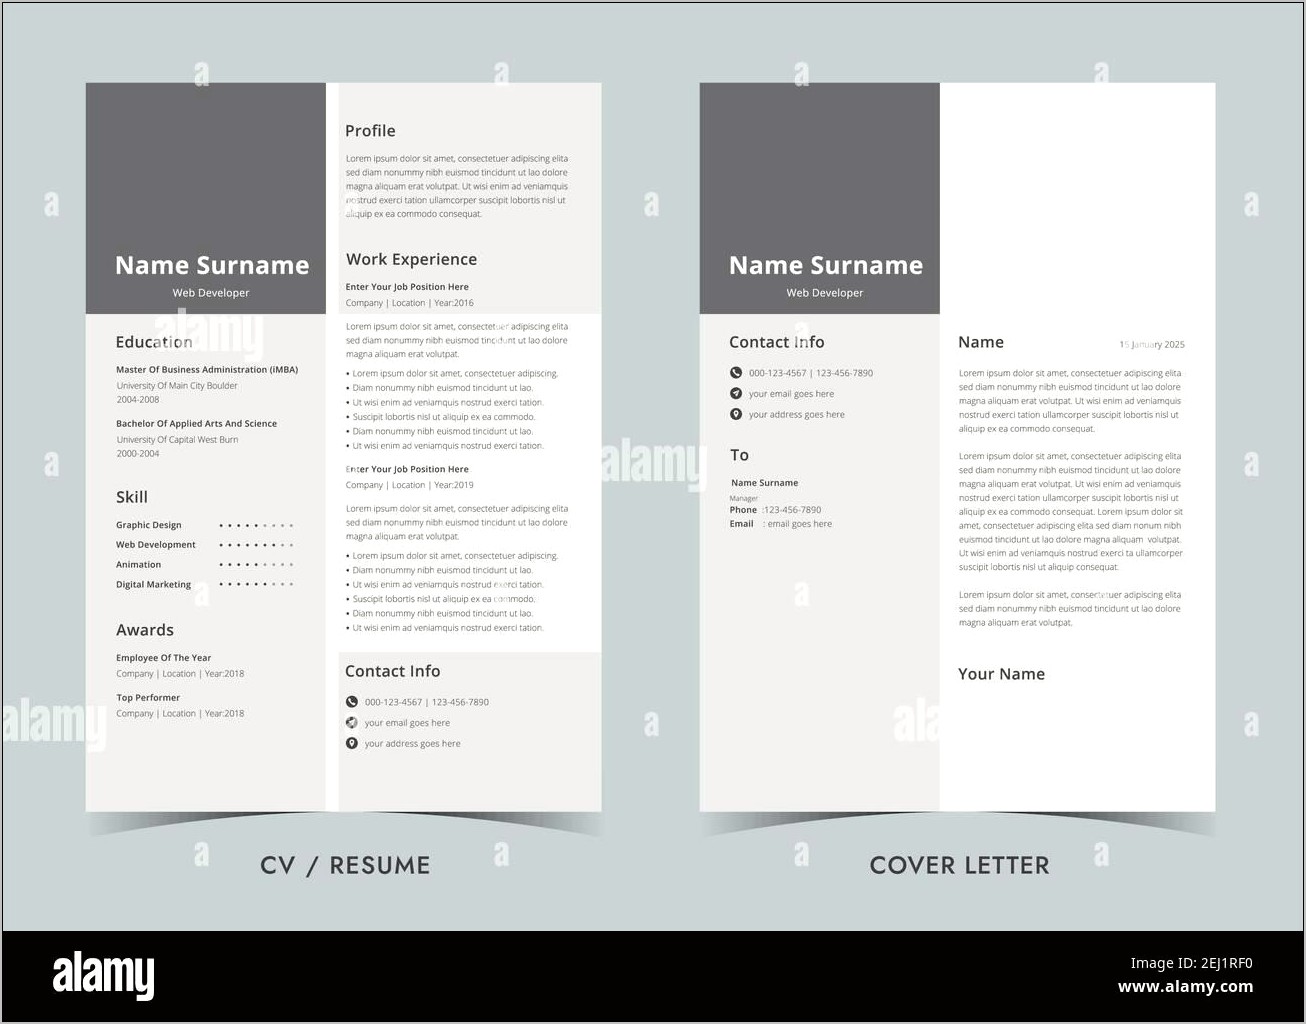 Cv And Cover Letter Resume Template